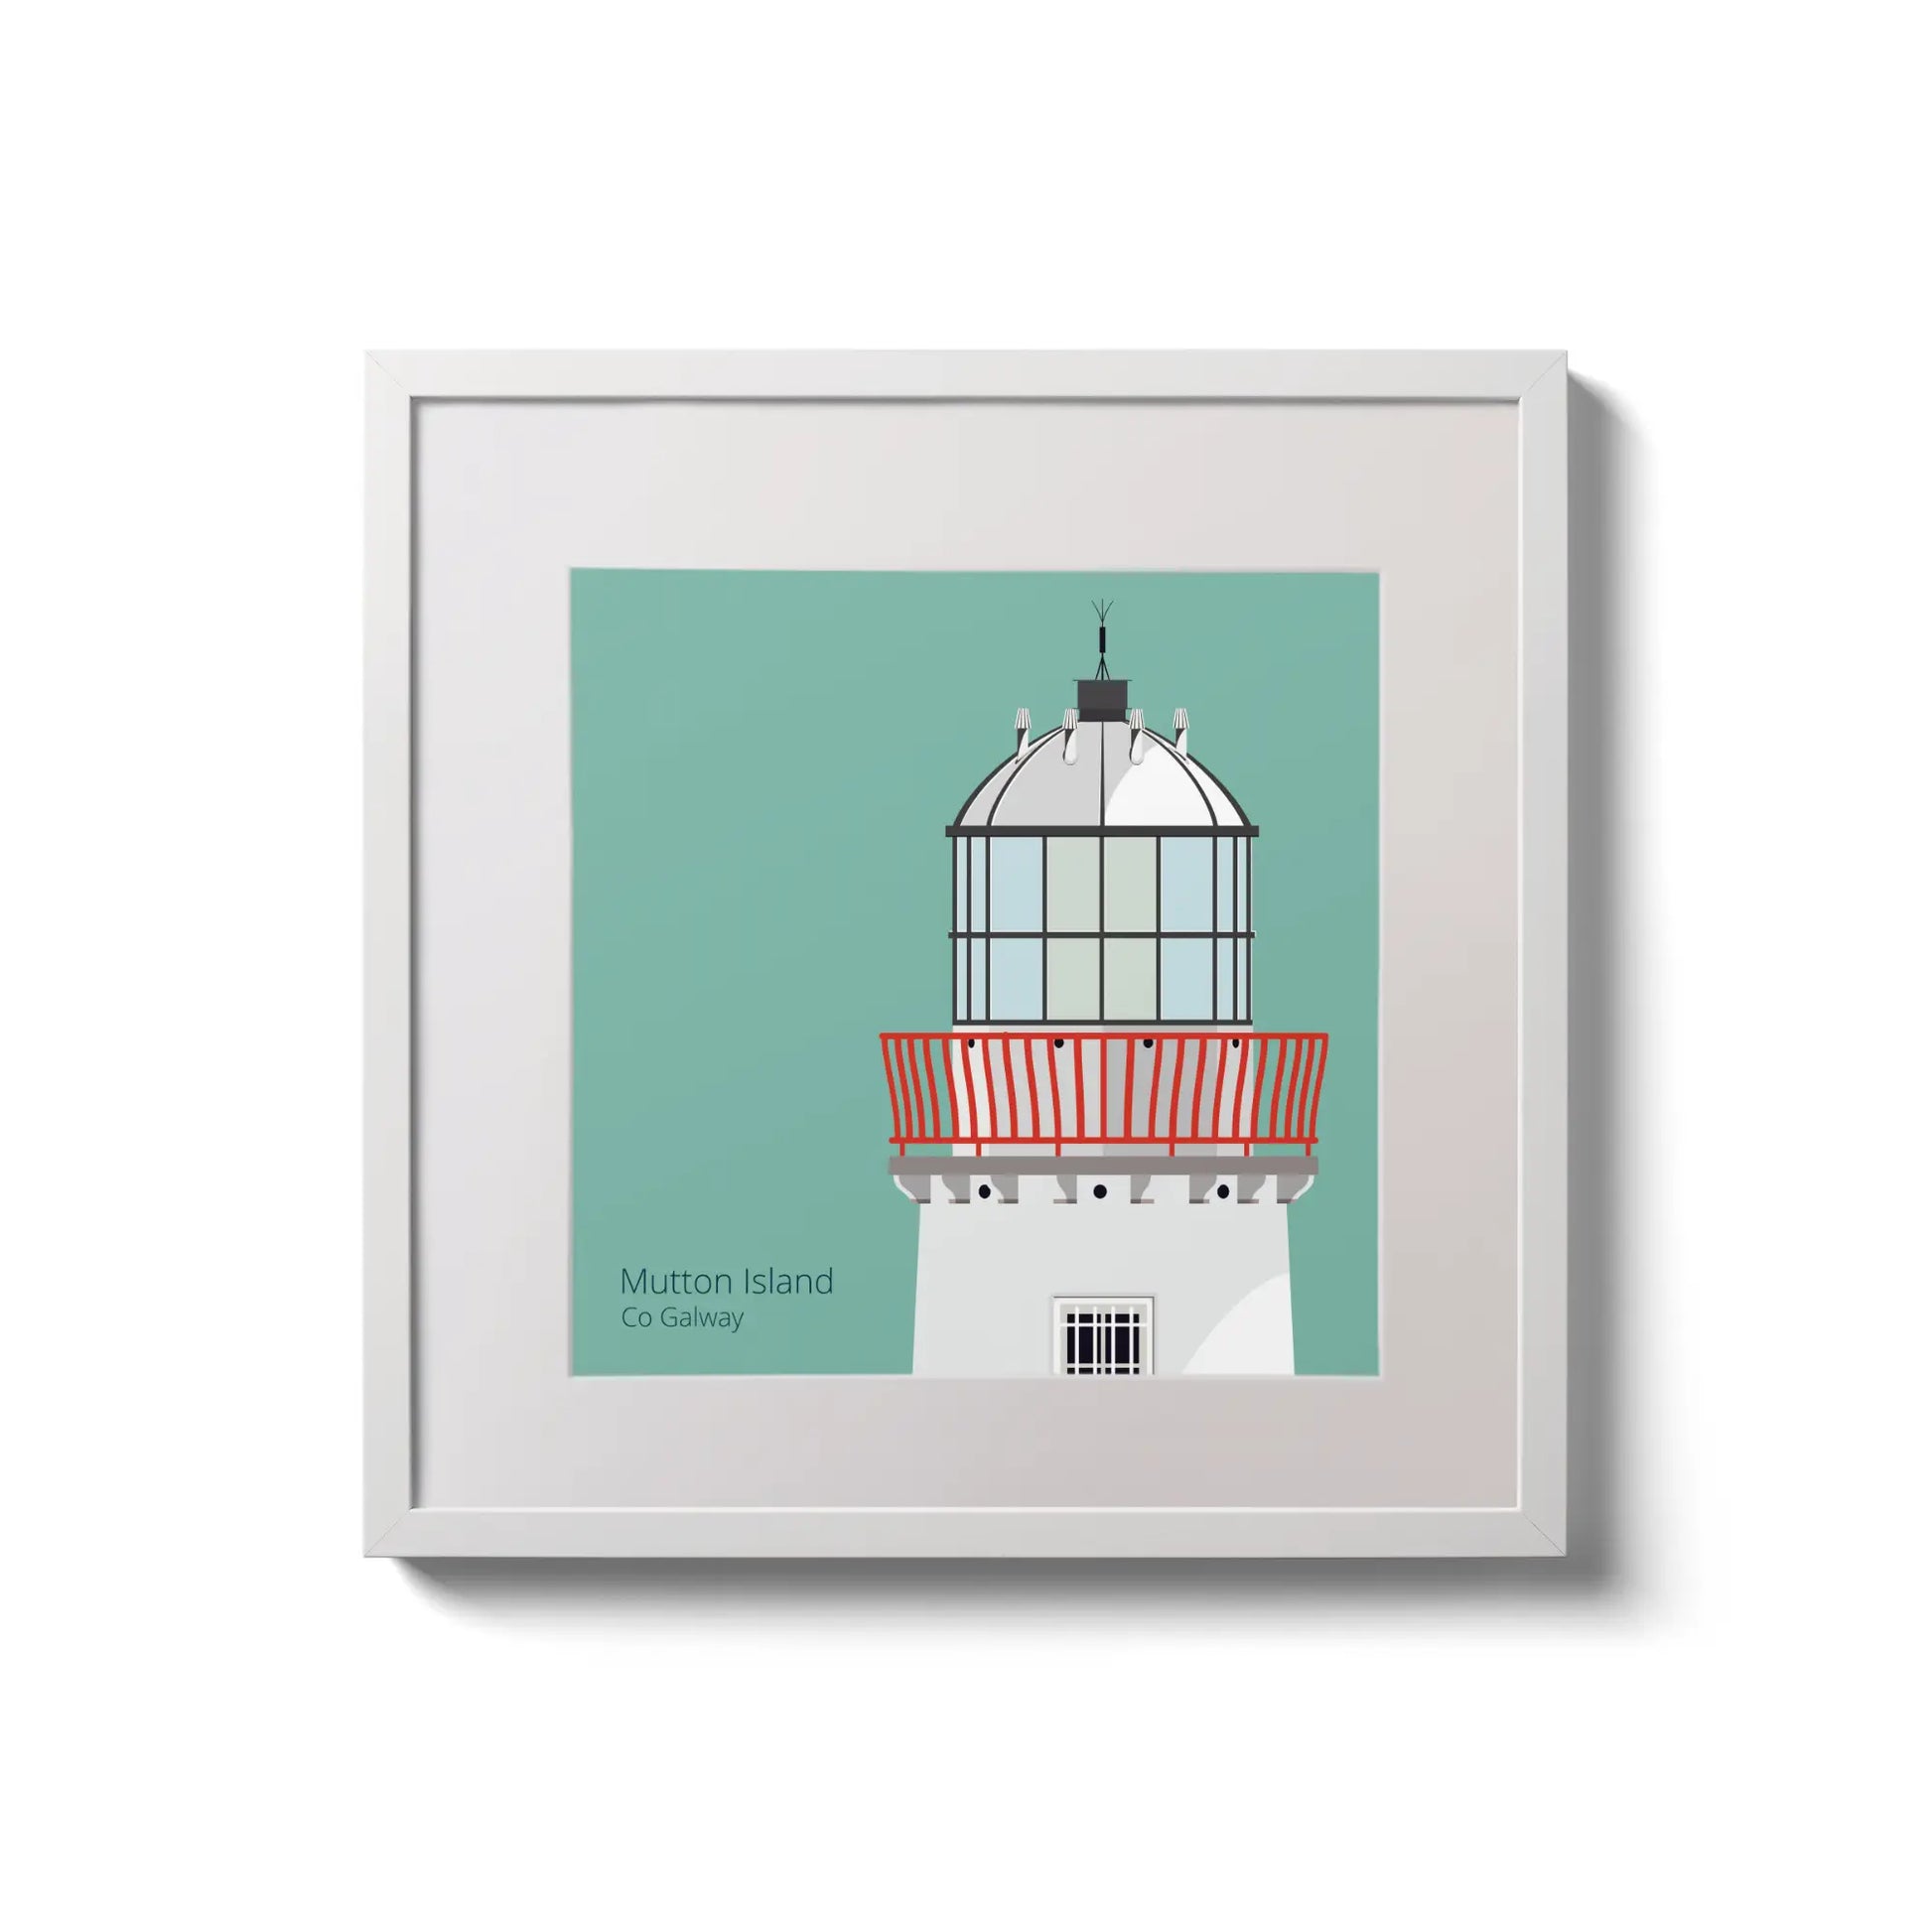 Illustration of Mutton Island lighthouse on an ocean green background,  in a white square frame measuring 20x20cm.